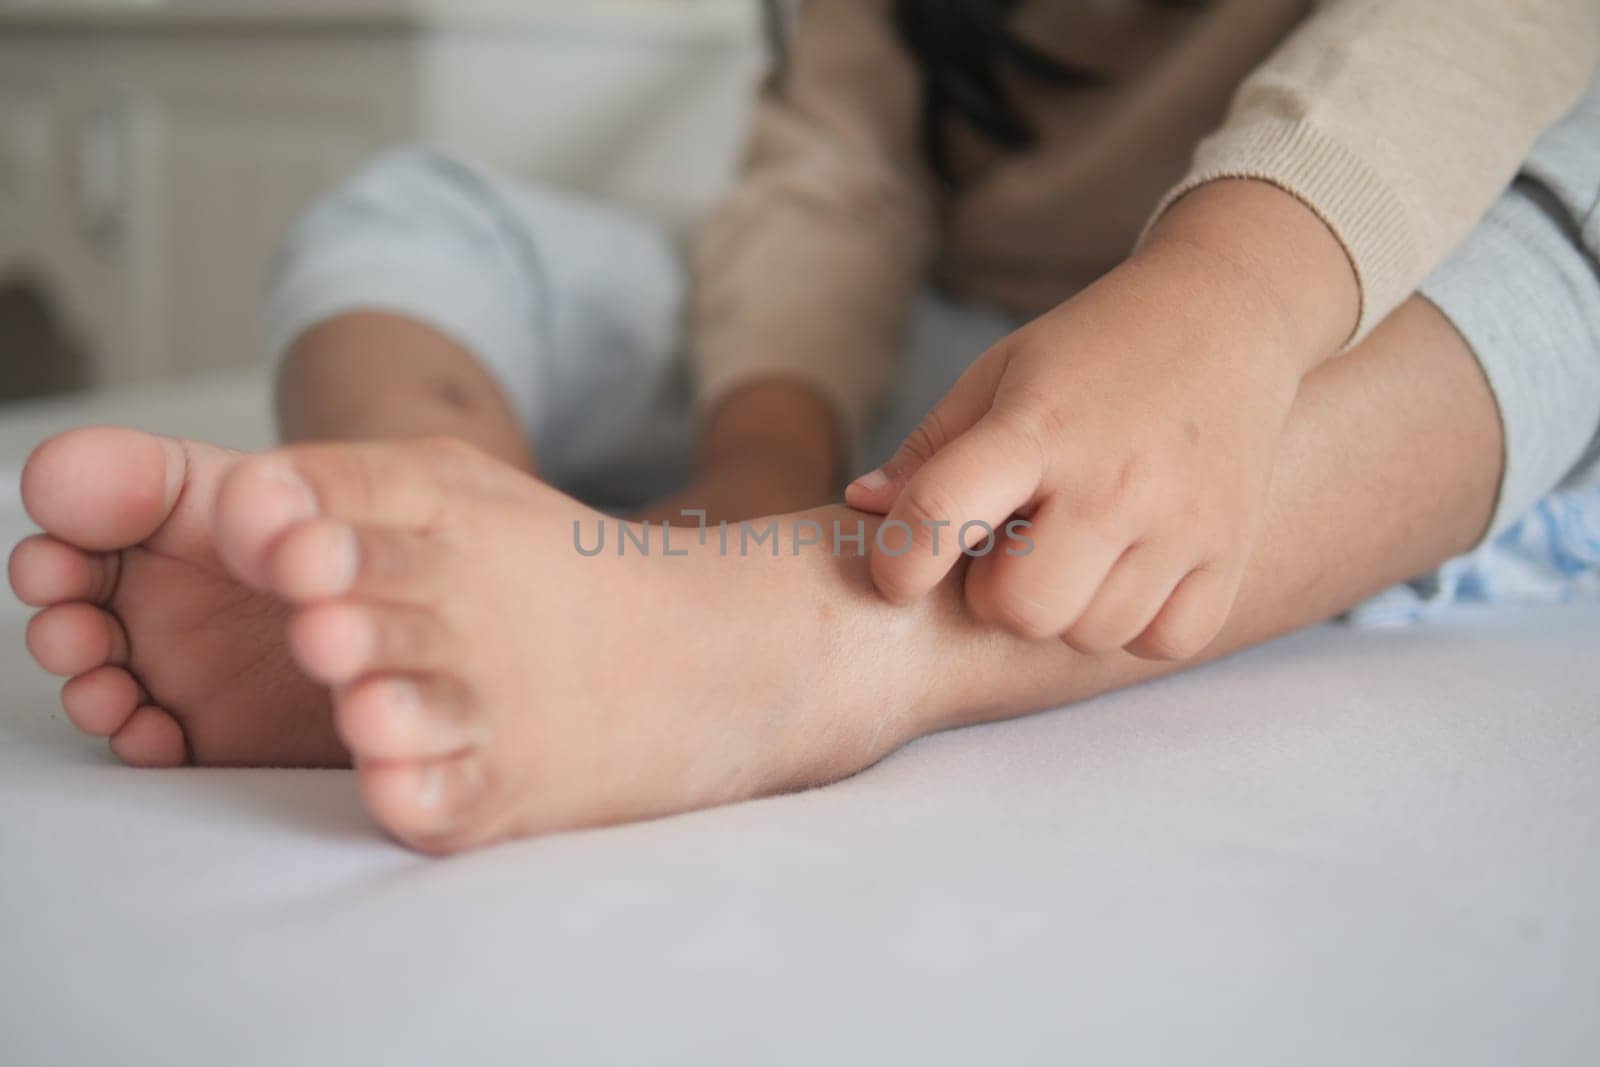 a kid suffering from itching skin on feet .